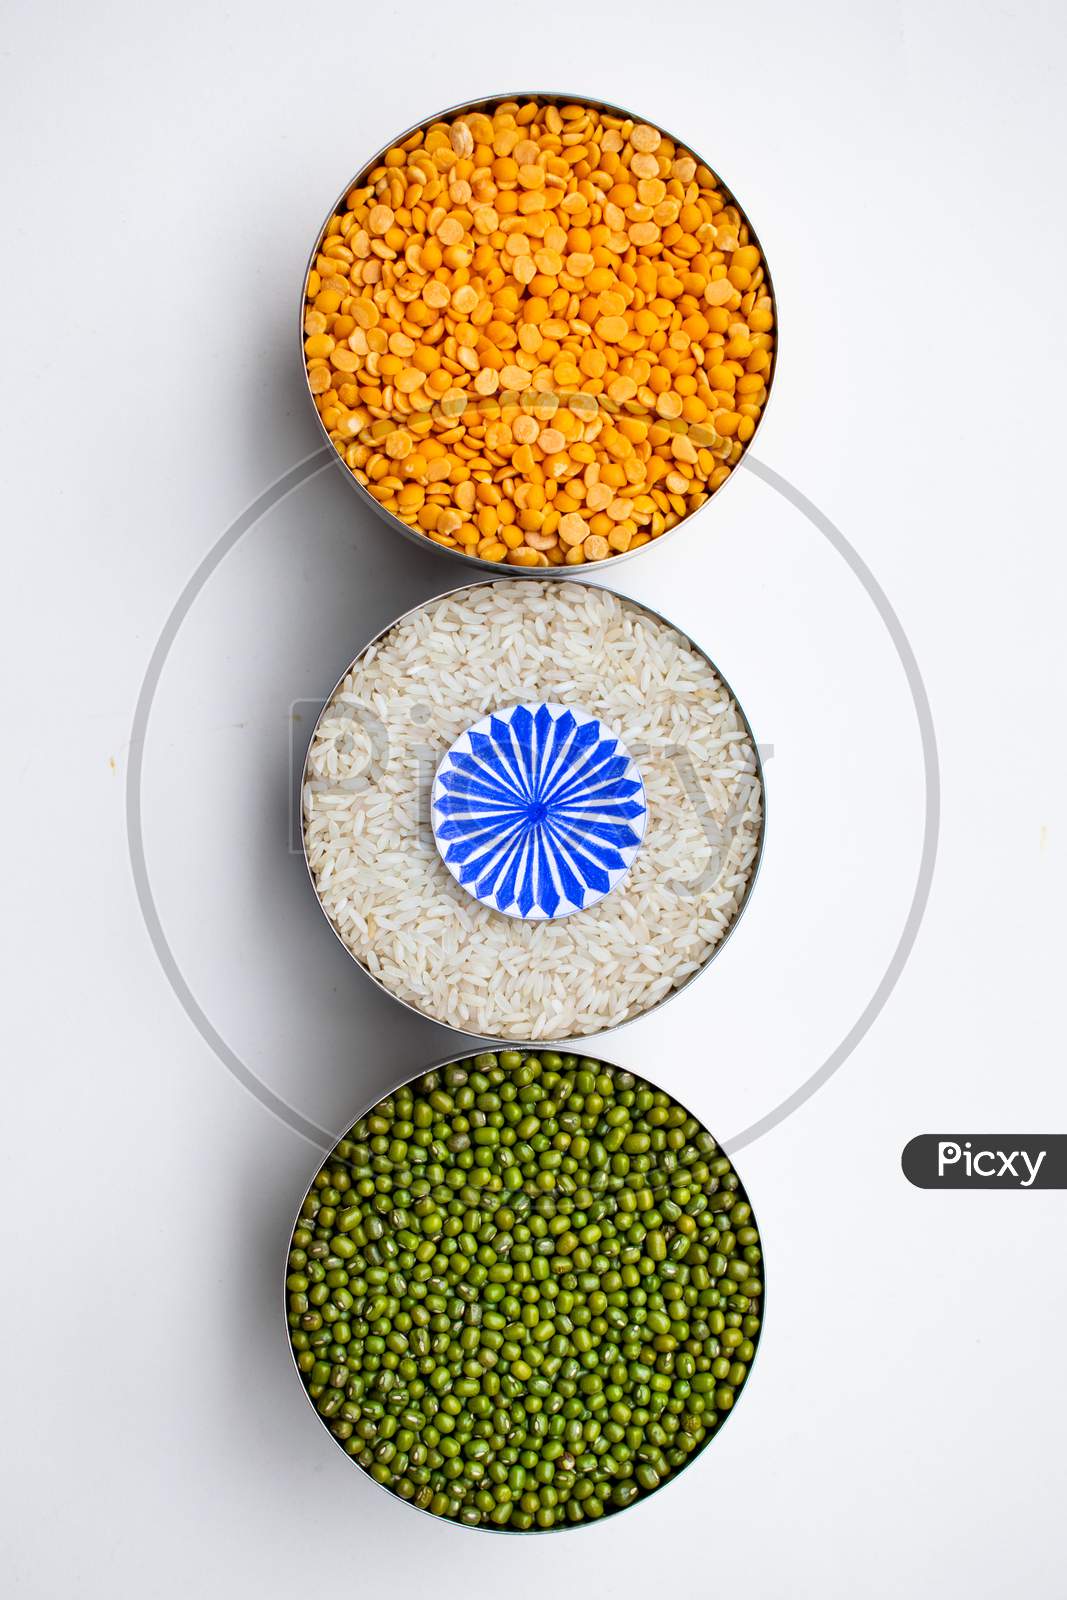 Indian flag, tiranga, tricolor made with arhar dal, rice and moong dal, closeup, independence day, republic day, concept, food, image